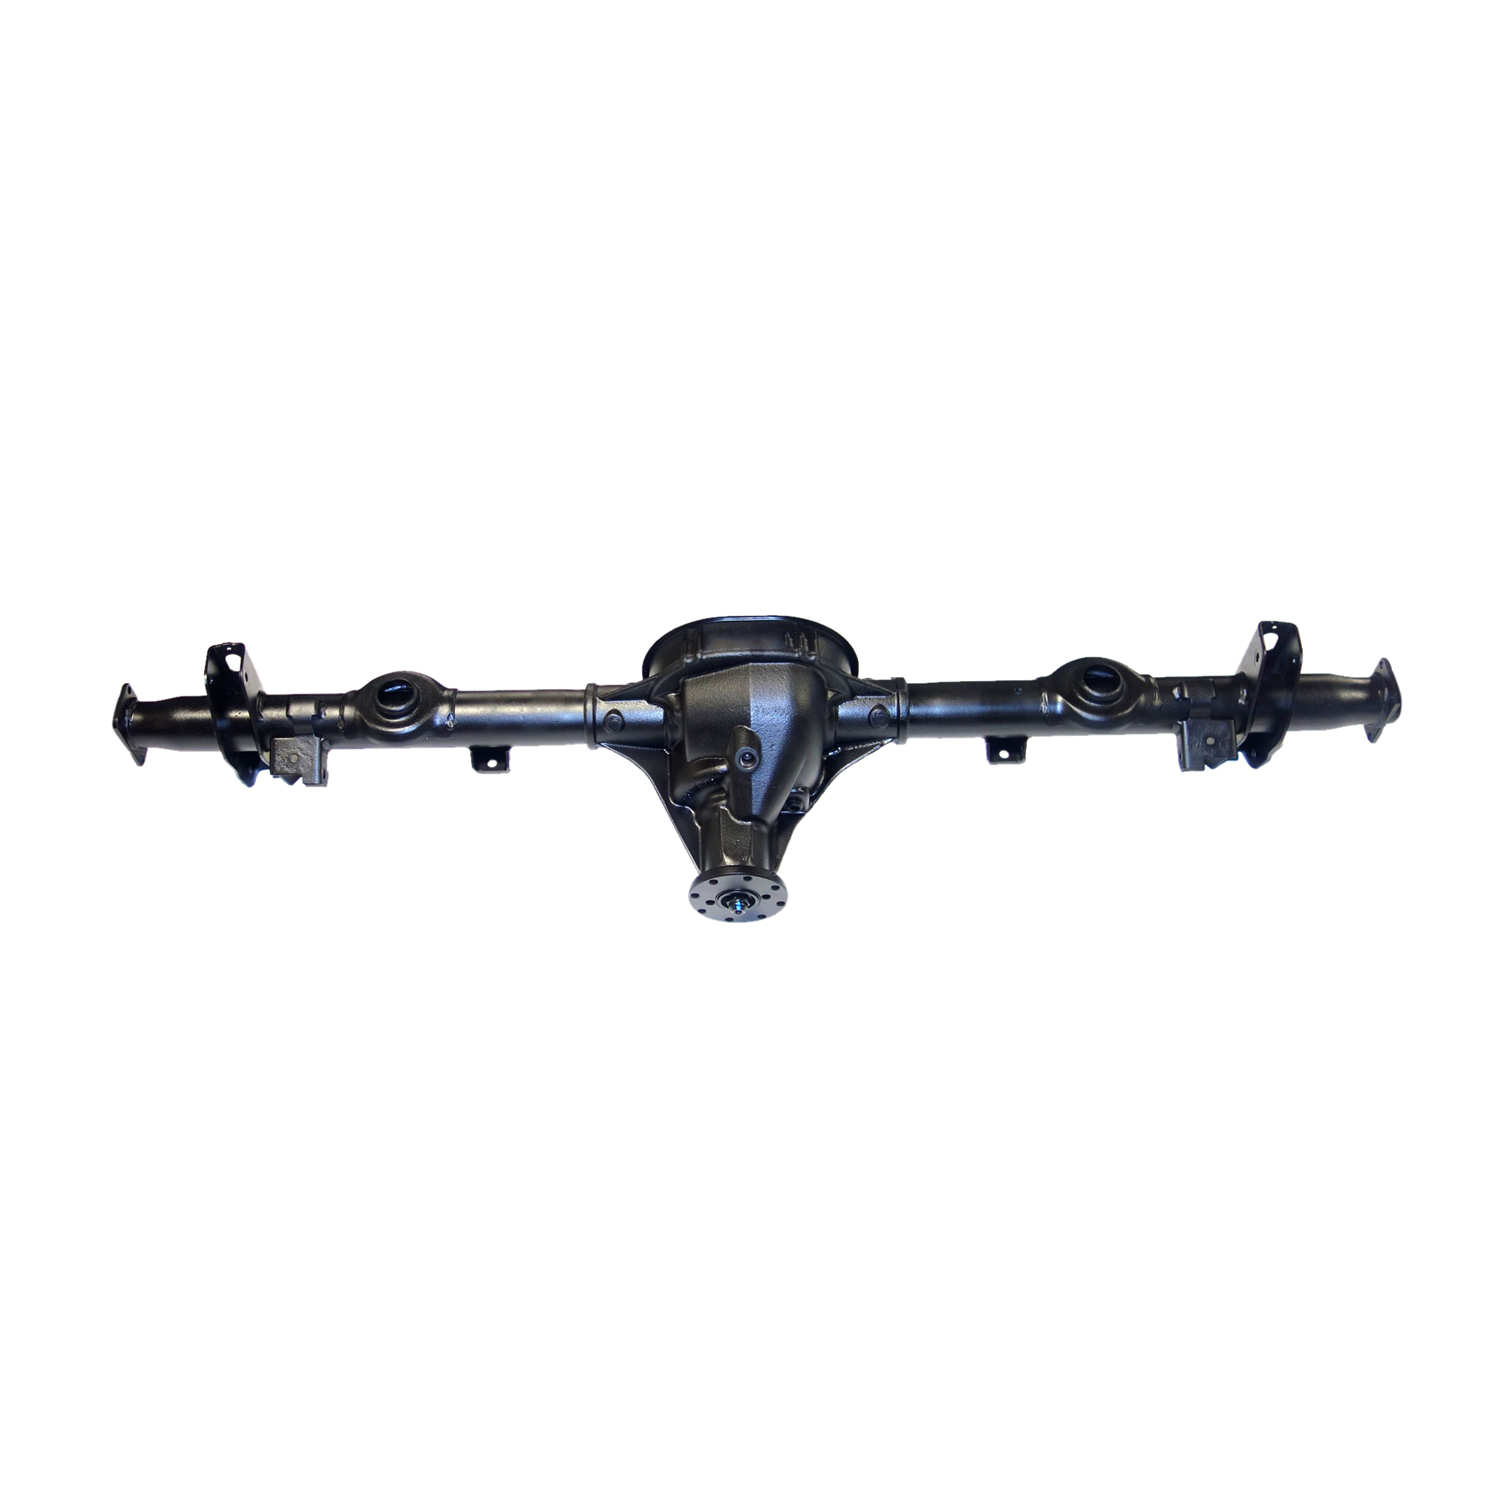 Remanufactured Axle Assembly for 8.8" 1992-94 Crown Vic Drum Brake with ABS, 3.27 , Posi